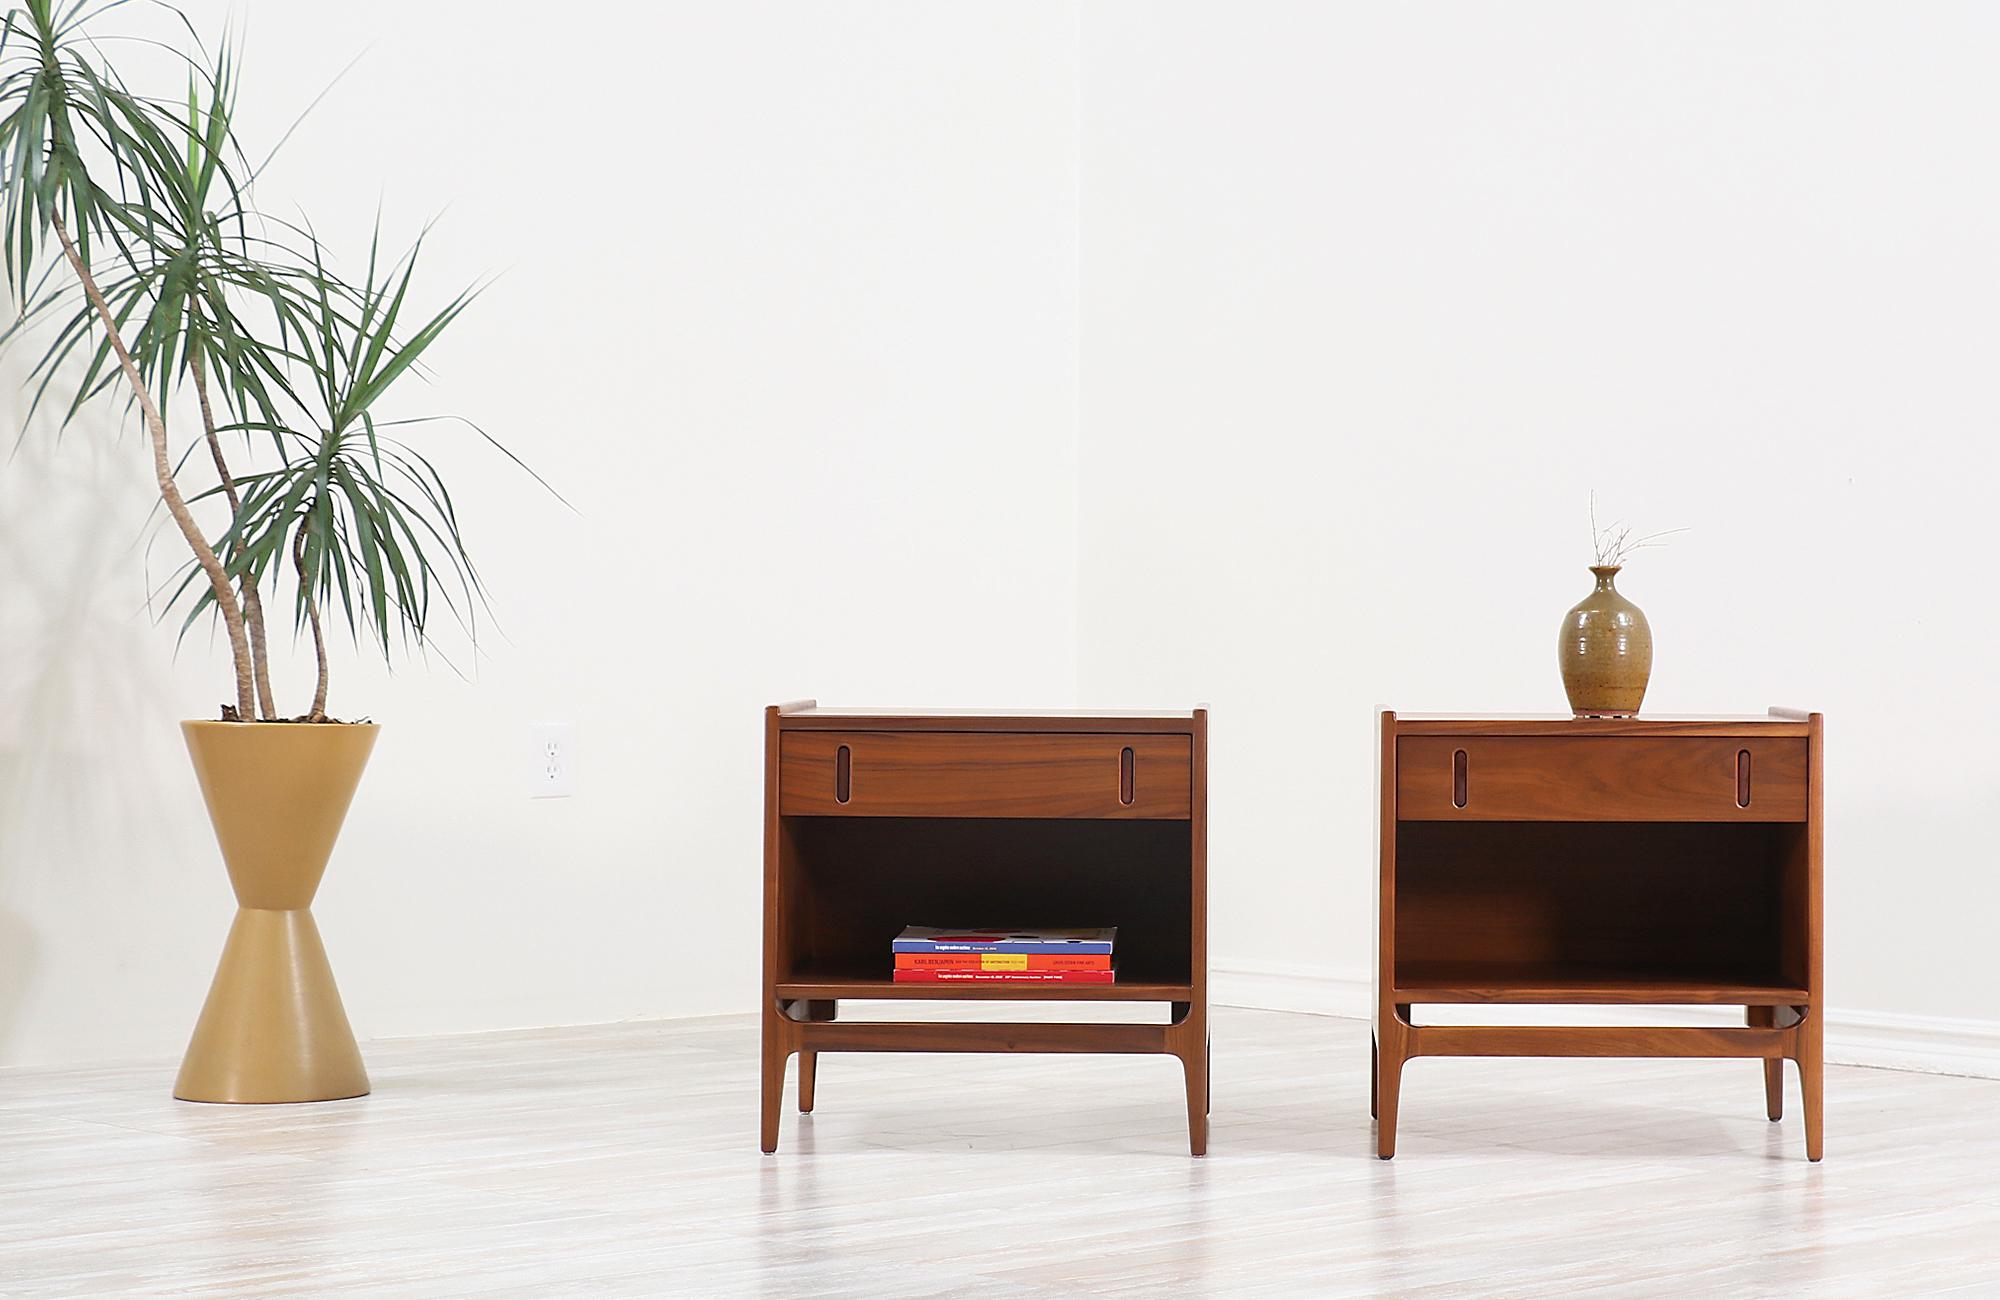 A pair of stylish modern nightstands designed by Richard Thompson for Glenn of California ‘Baronet’ line in the United States, circa 1950s. These sleek nightstands feature a sturdy walnut wood case with integrated legs, and retractable rosewood